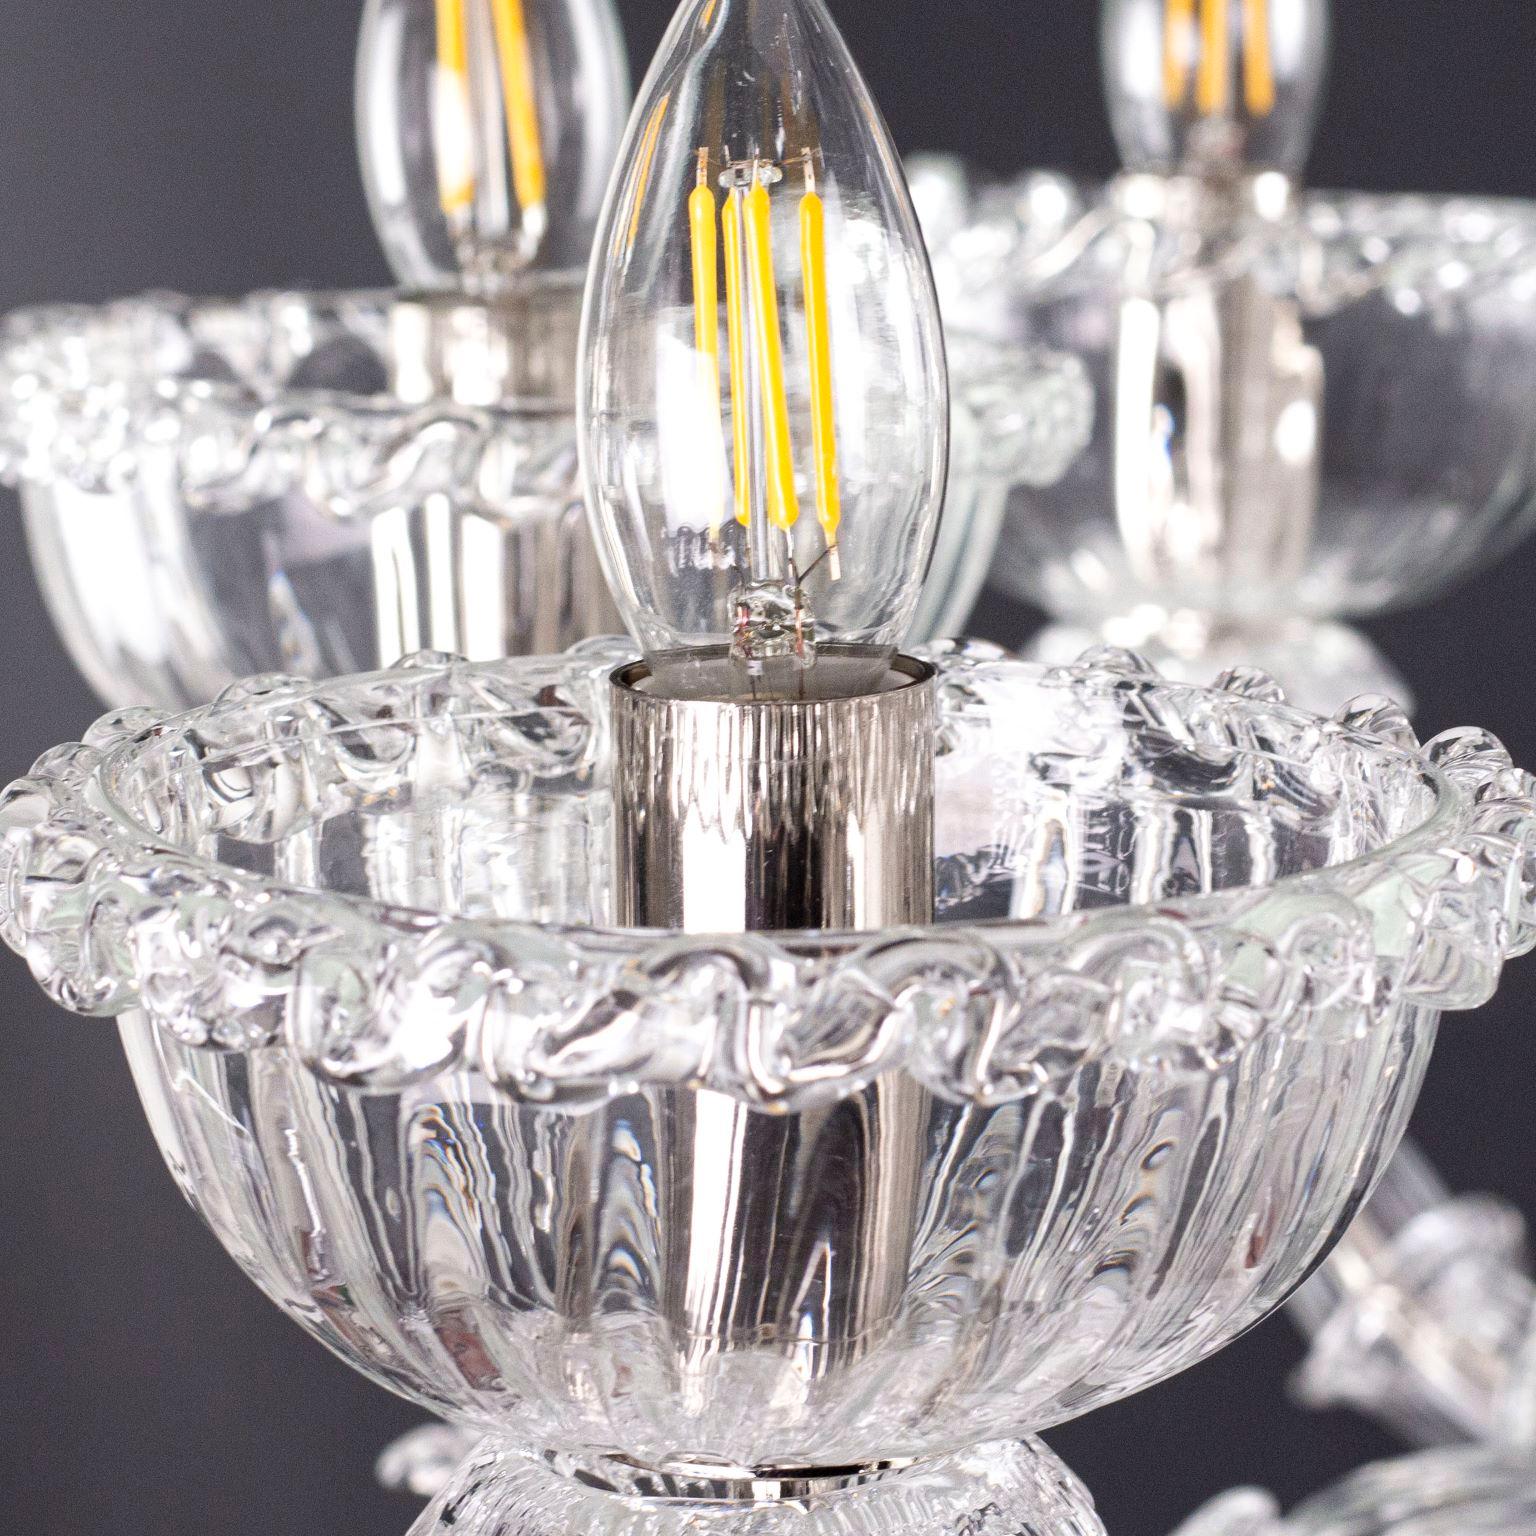 Luxury rezzonico chandelier 9 arms, crystal glass by Multiforme.
This chandelier evokes the splendour of the past centuries. It is an evergreen model, a Classic product manufactured by our skilled masters glass-worker.
The Murano glass